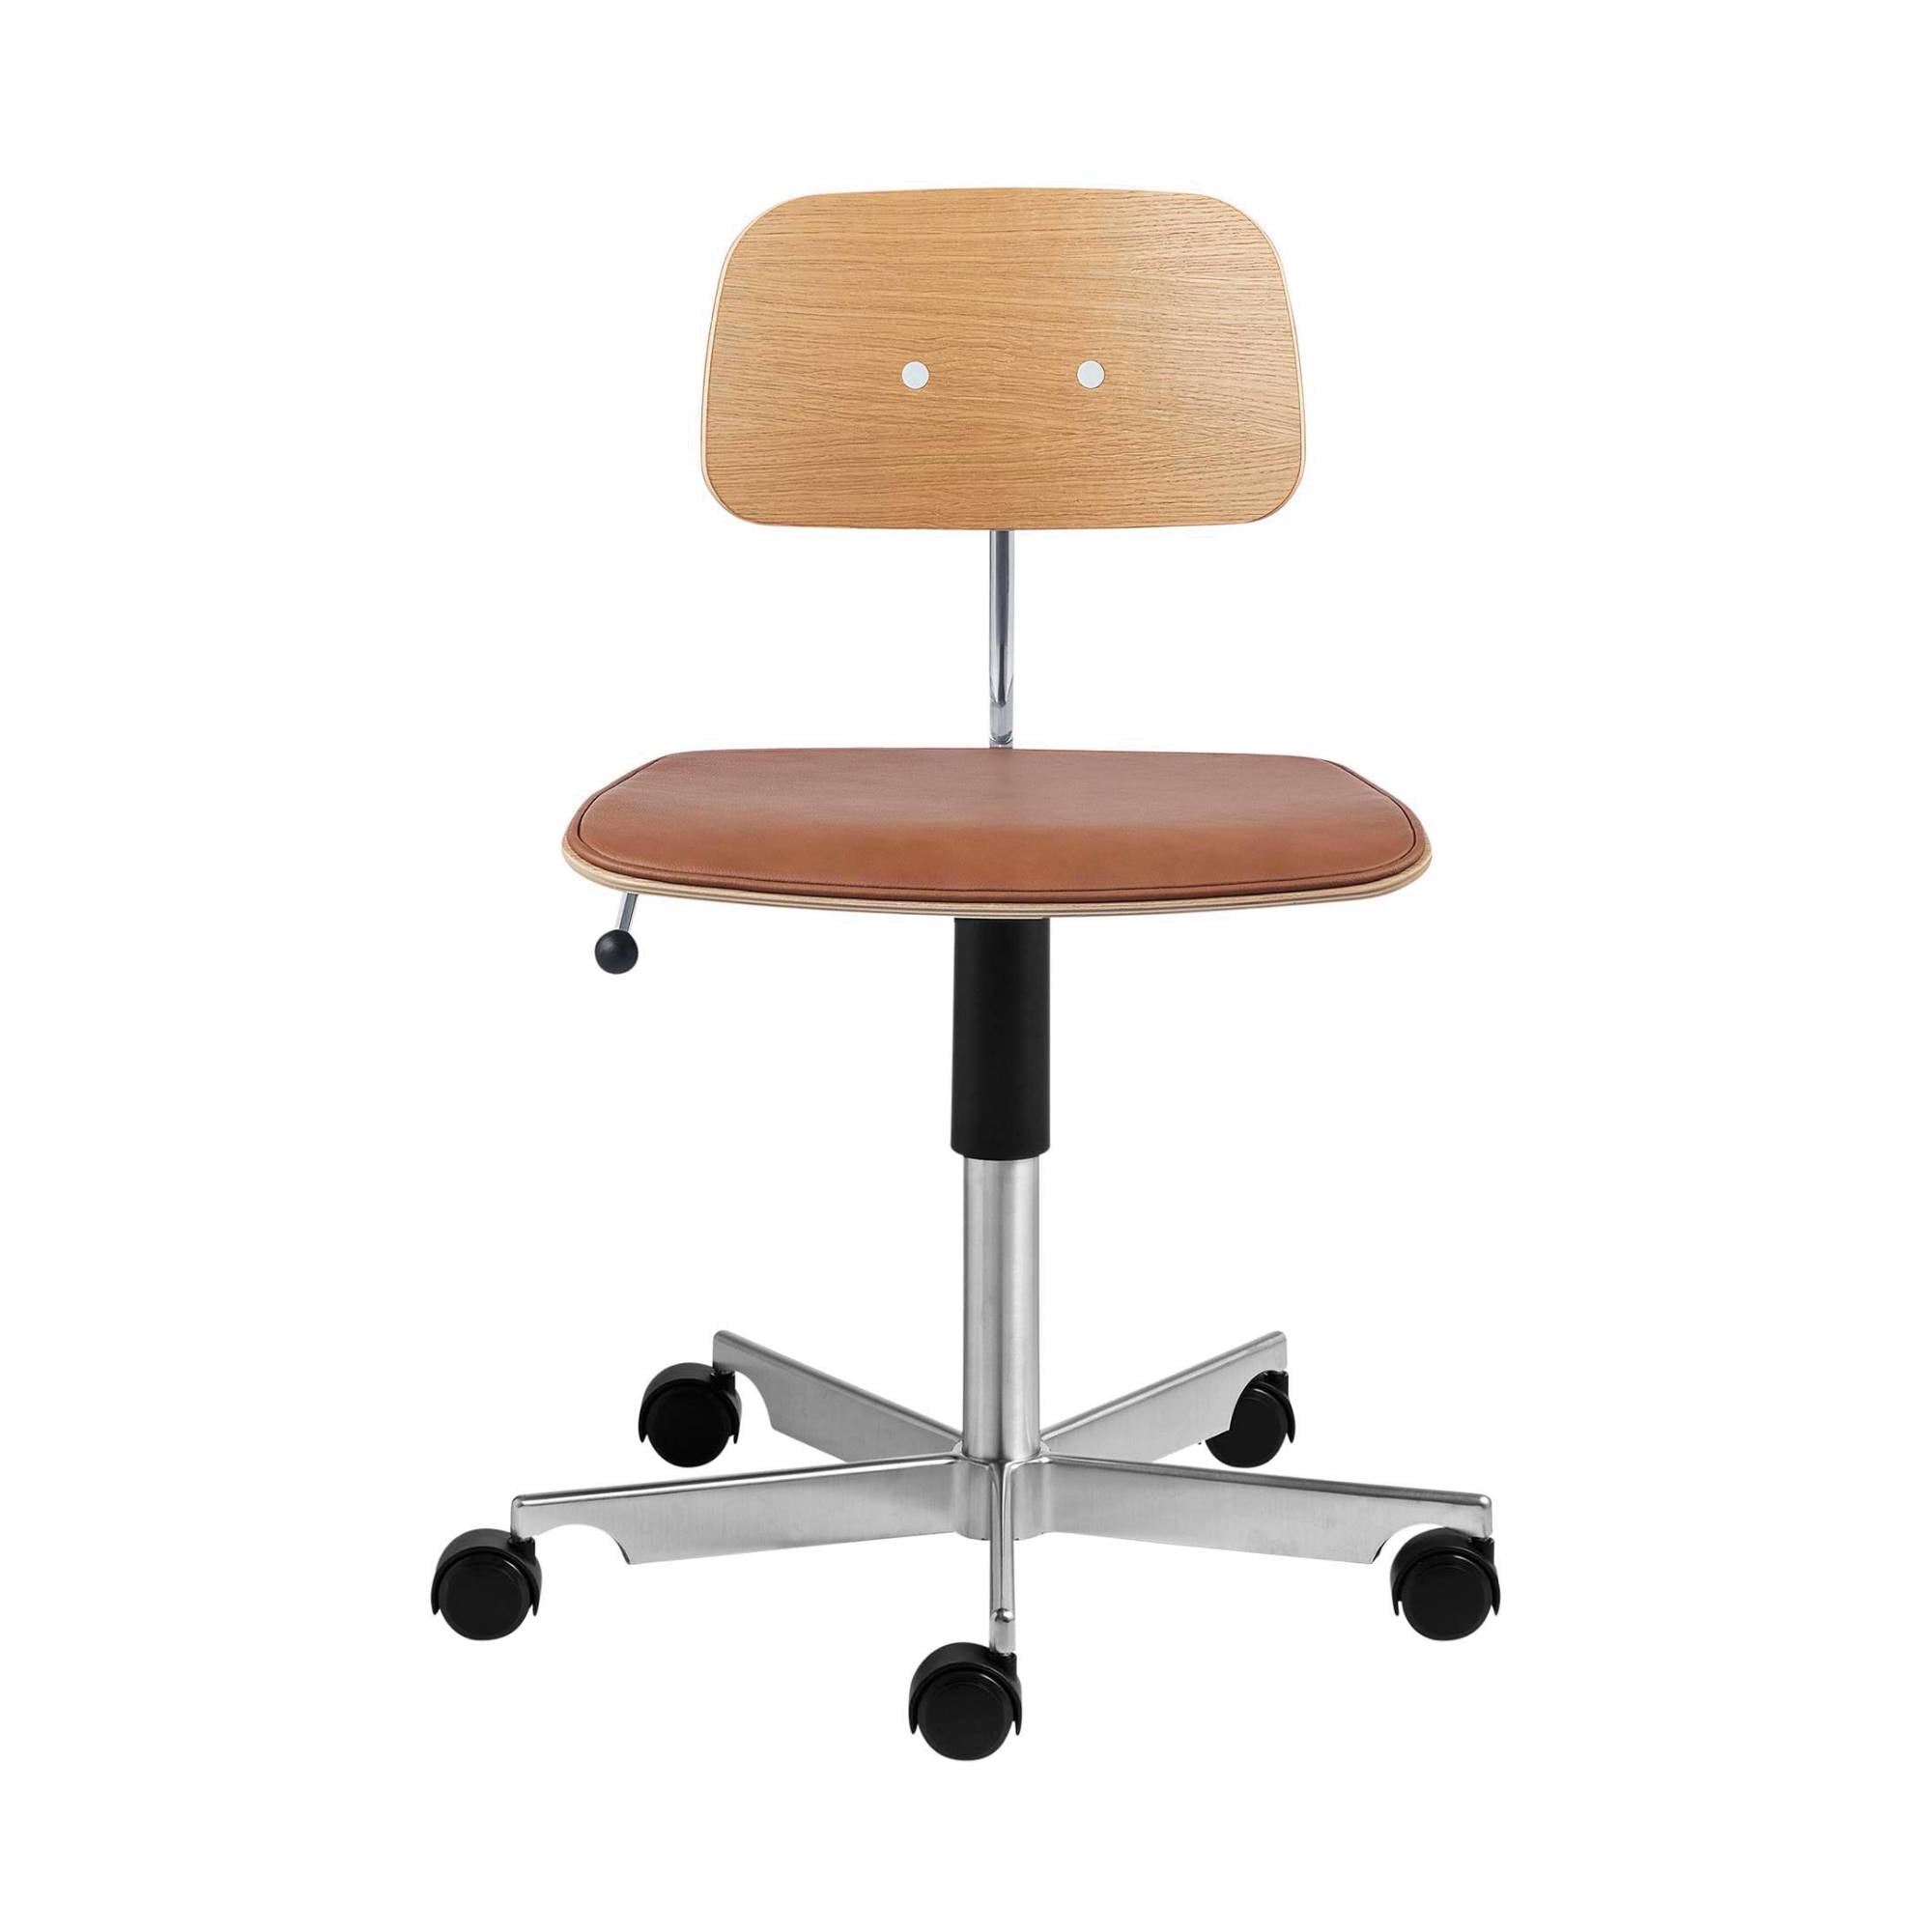 Kevi 2533 Chair: Size A + Seat Upholstered + Veneer - Oak